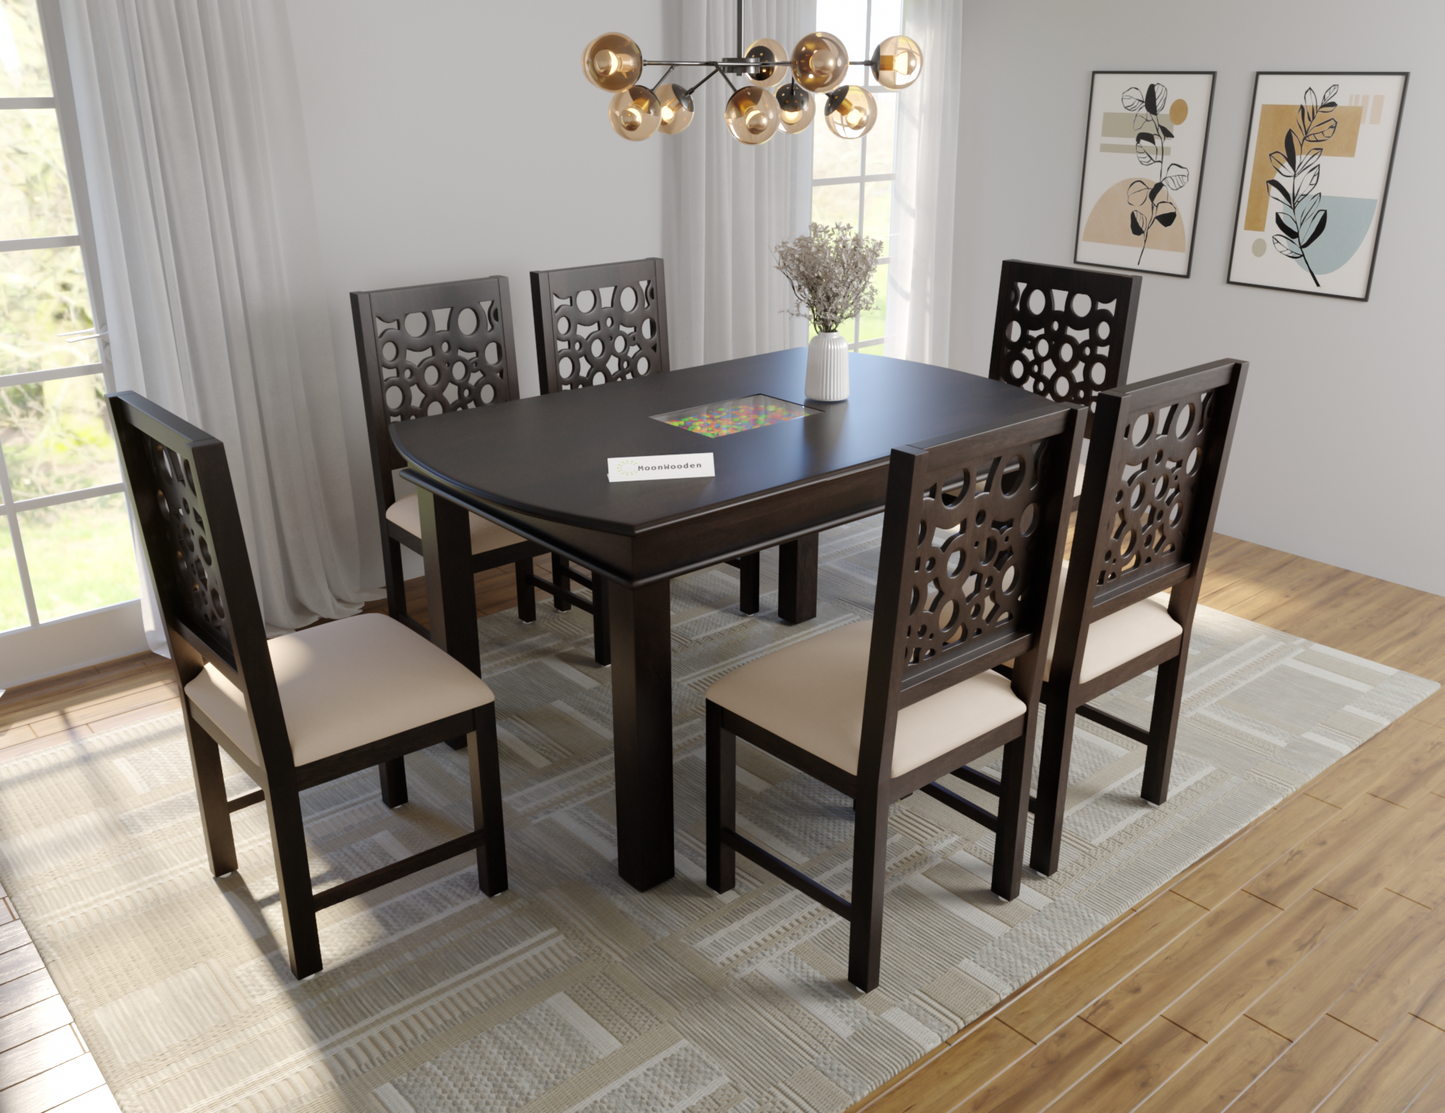 MoonWooden Sheesham Wooden Dining Table 6 Seater | Six Seater Dinning Table with 6 Chairs for Home | Dining Room Sets for Restraunts |Top Round Degine| Sheesham Wood, Dark Walnut